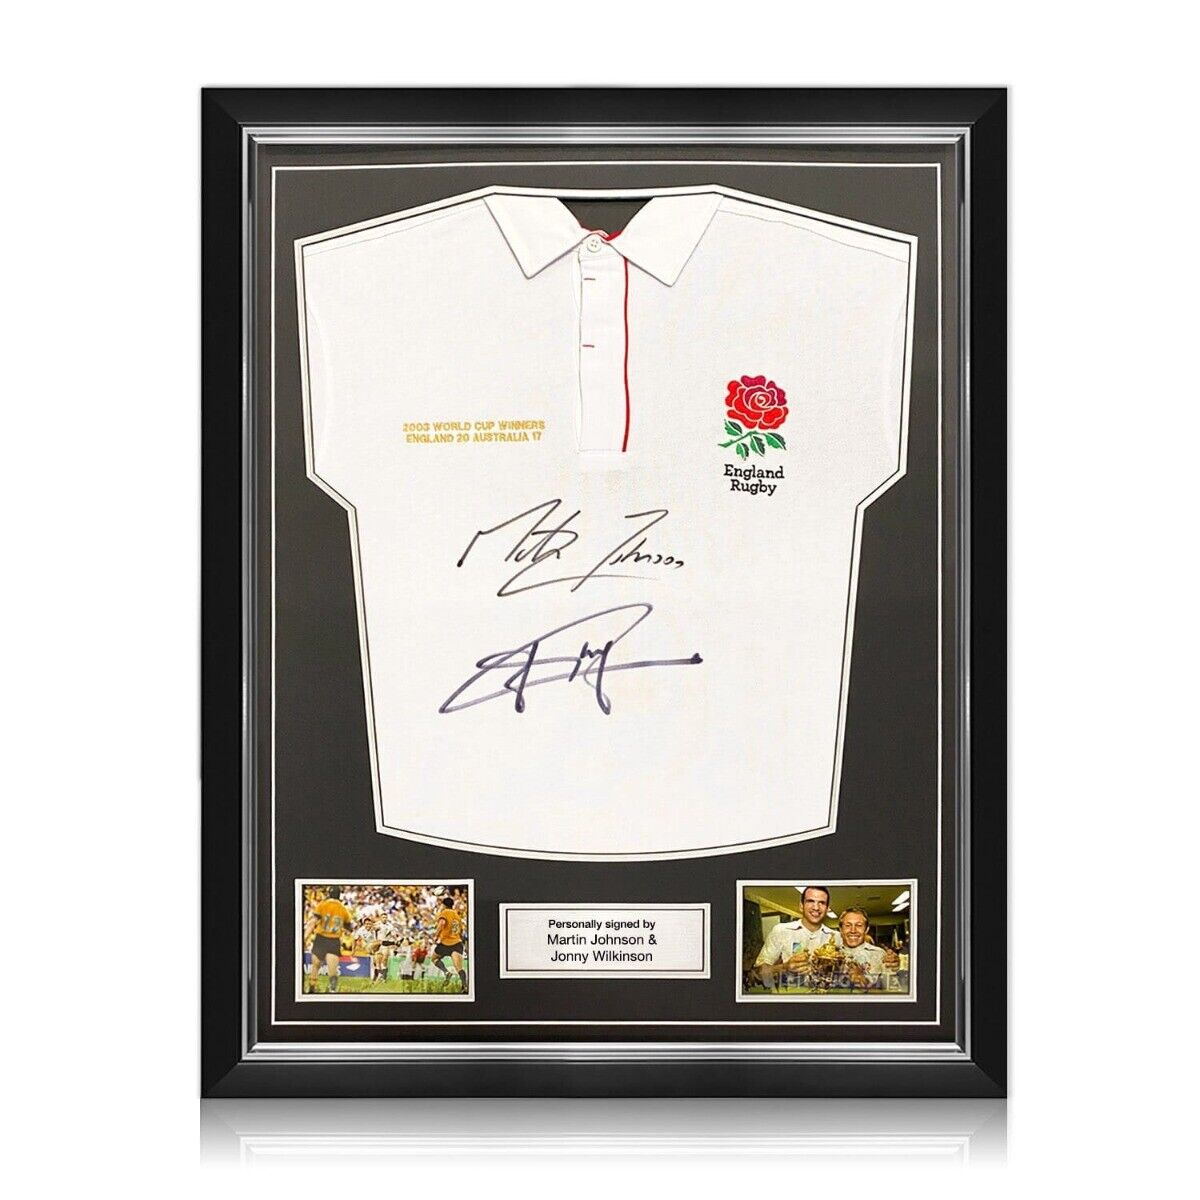 Jonny Wilkinson And Martin Johnson Signed England Rugby Jersey. Superior Frame